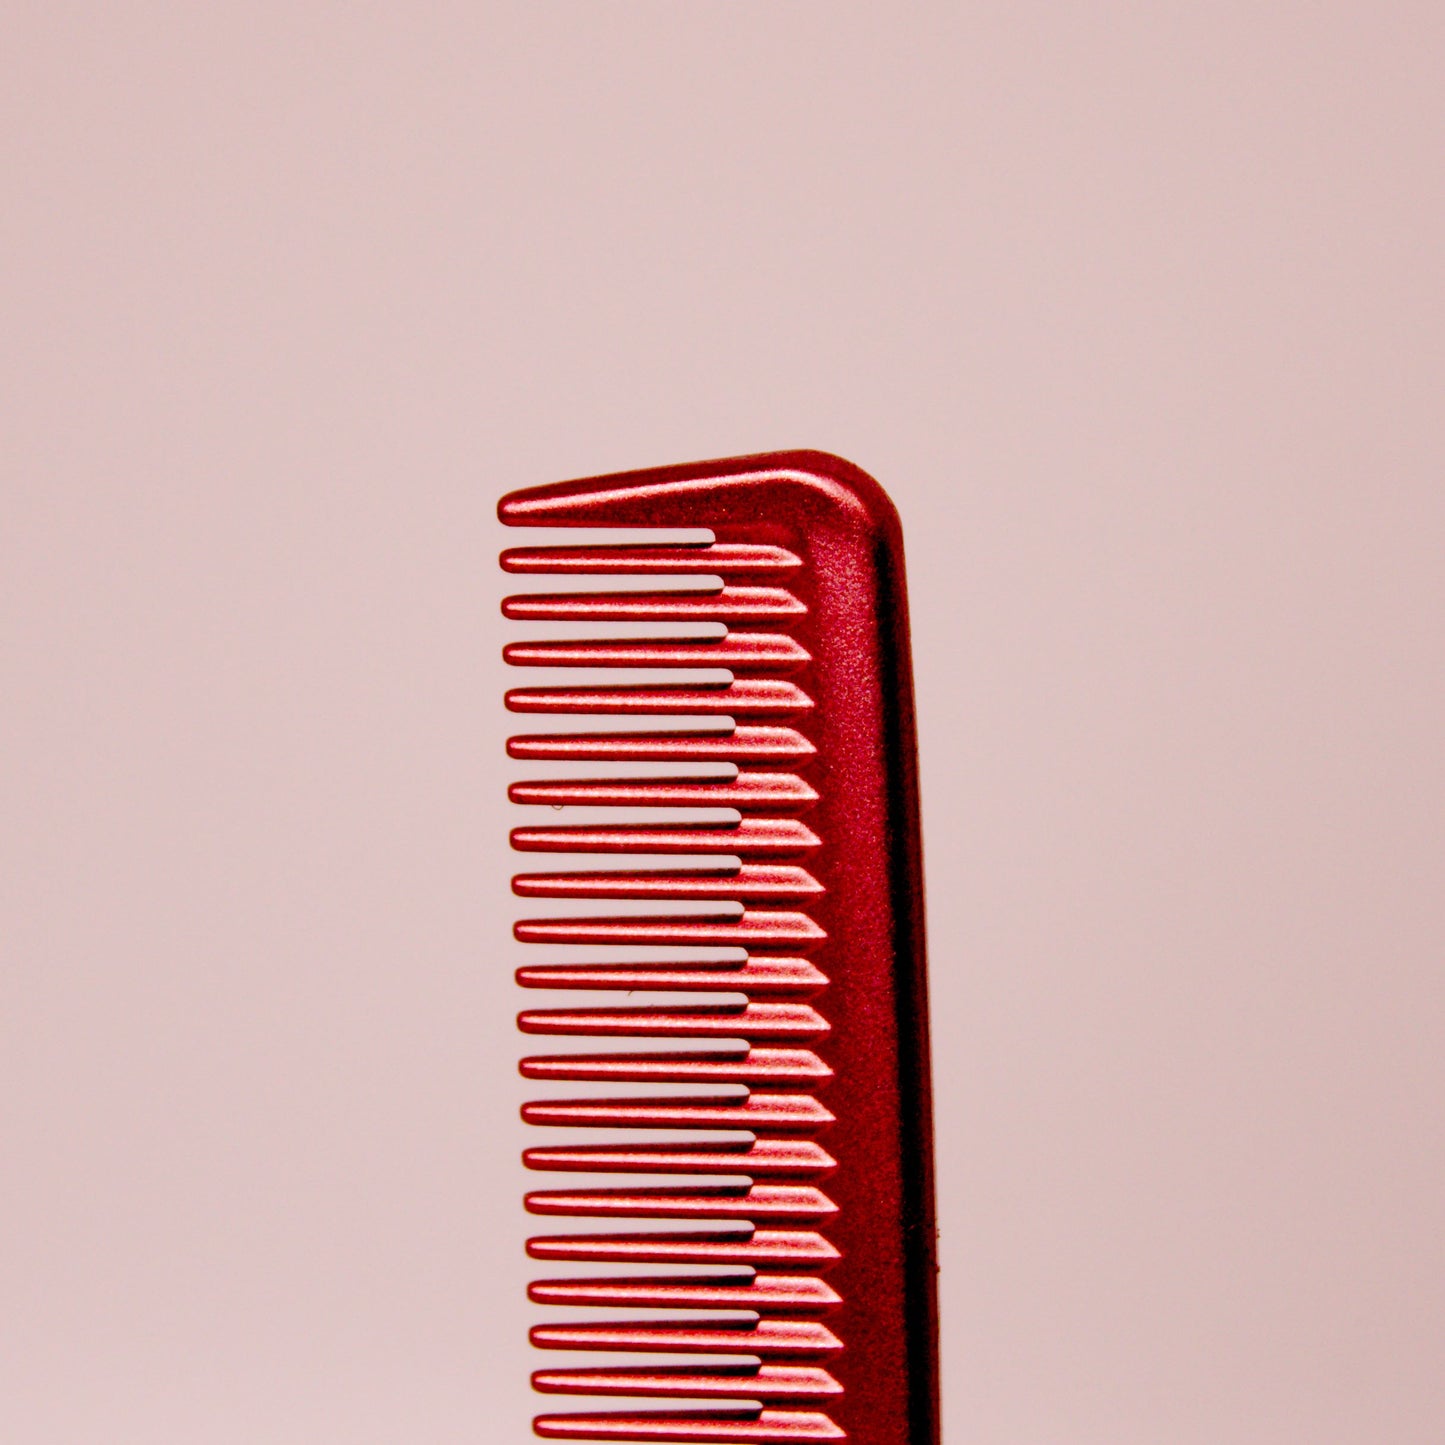 Pegasus MICOLOR 201, 7in Hard Rubber Hair Detangling/Trimmer Comb, Handmade, Seamless, Smooth Edges, Anti Static, Heat and Chemically Resistant, Wet Hair, Everyday Grooming Comb | Peines de goma dura - Copper